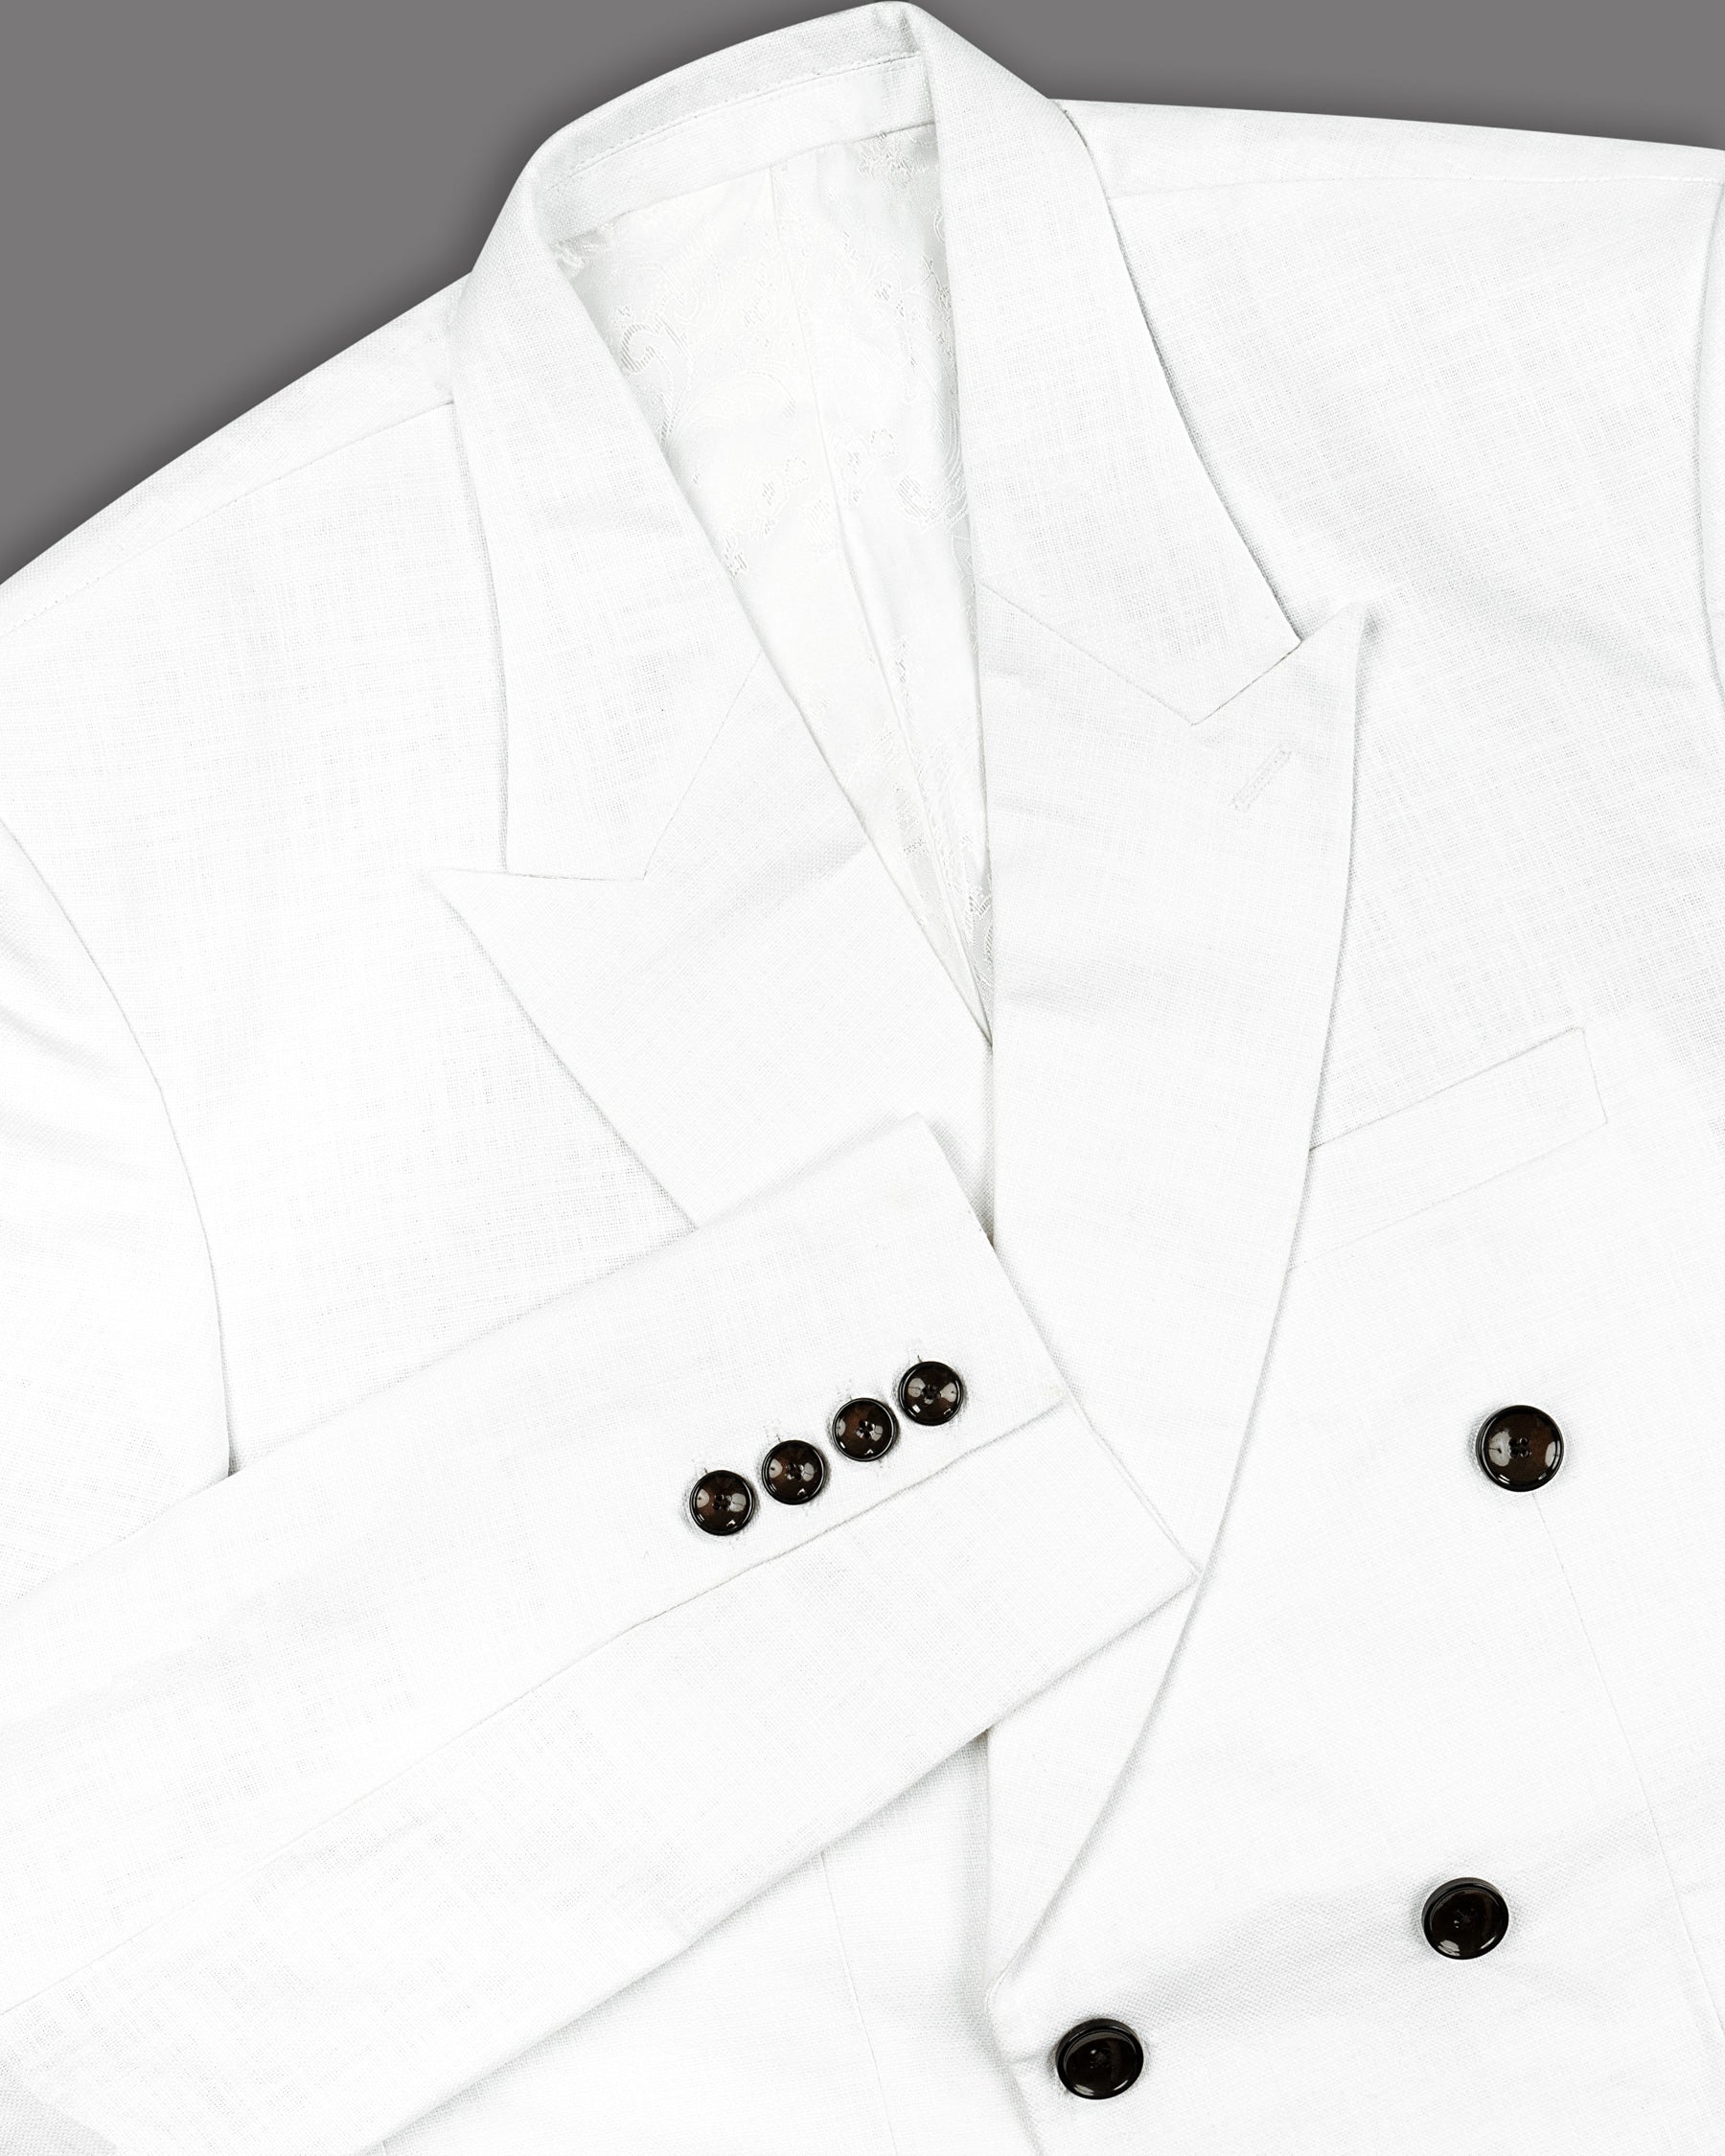 BRIGHT WHITE LUXURIOUS LINEN DOUBLE BREASTED PERFORMANCE BLAZER BL1239-DB-40, BL1239-DB-46, BL1239-DB-54, BL1239-DB-56, BL1239-DB-60, BL1239-DB-42, BL1239-DB-36, BL1239-DB-38, BL1239-DB-44, BL1239-DB-50, BL1239-DB-58, BL1239-DB-52, BL1239-DB-48